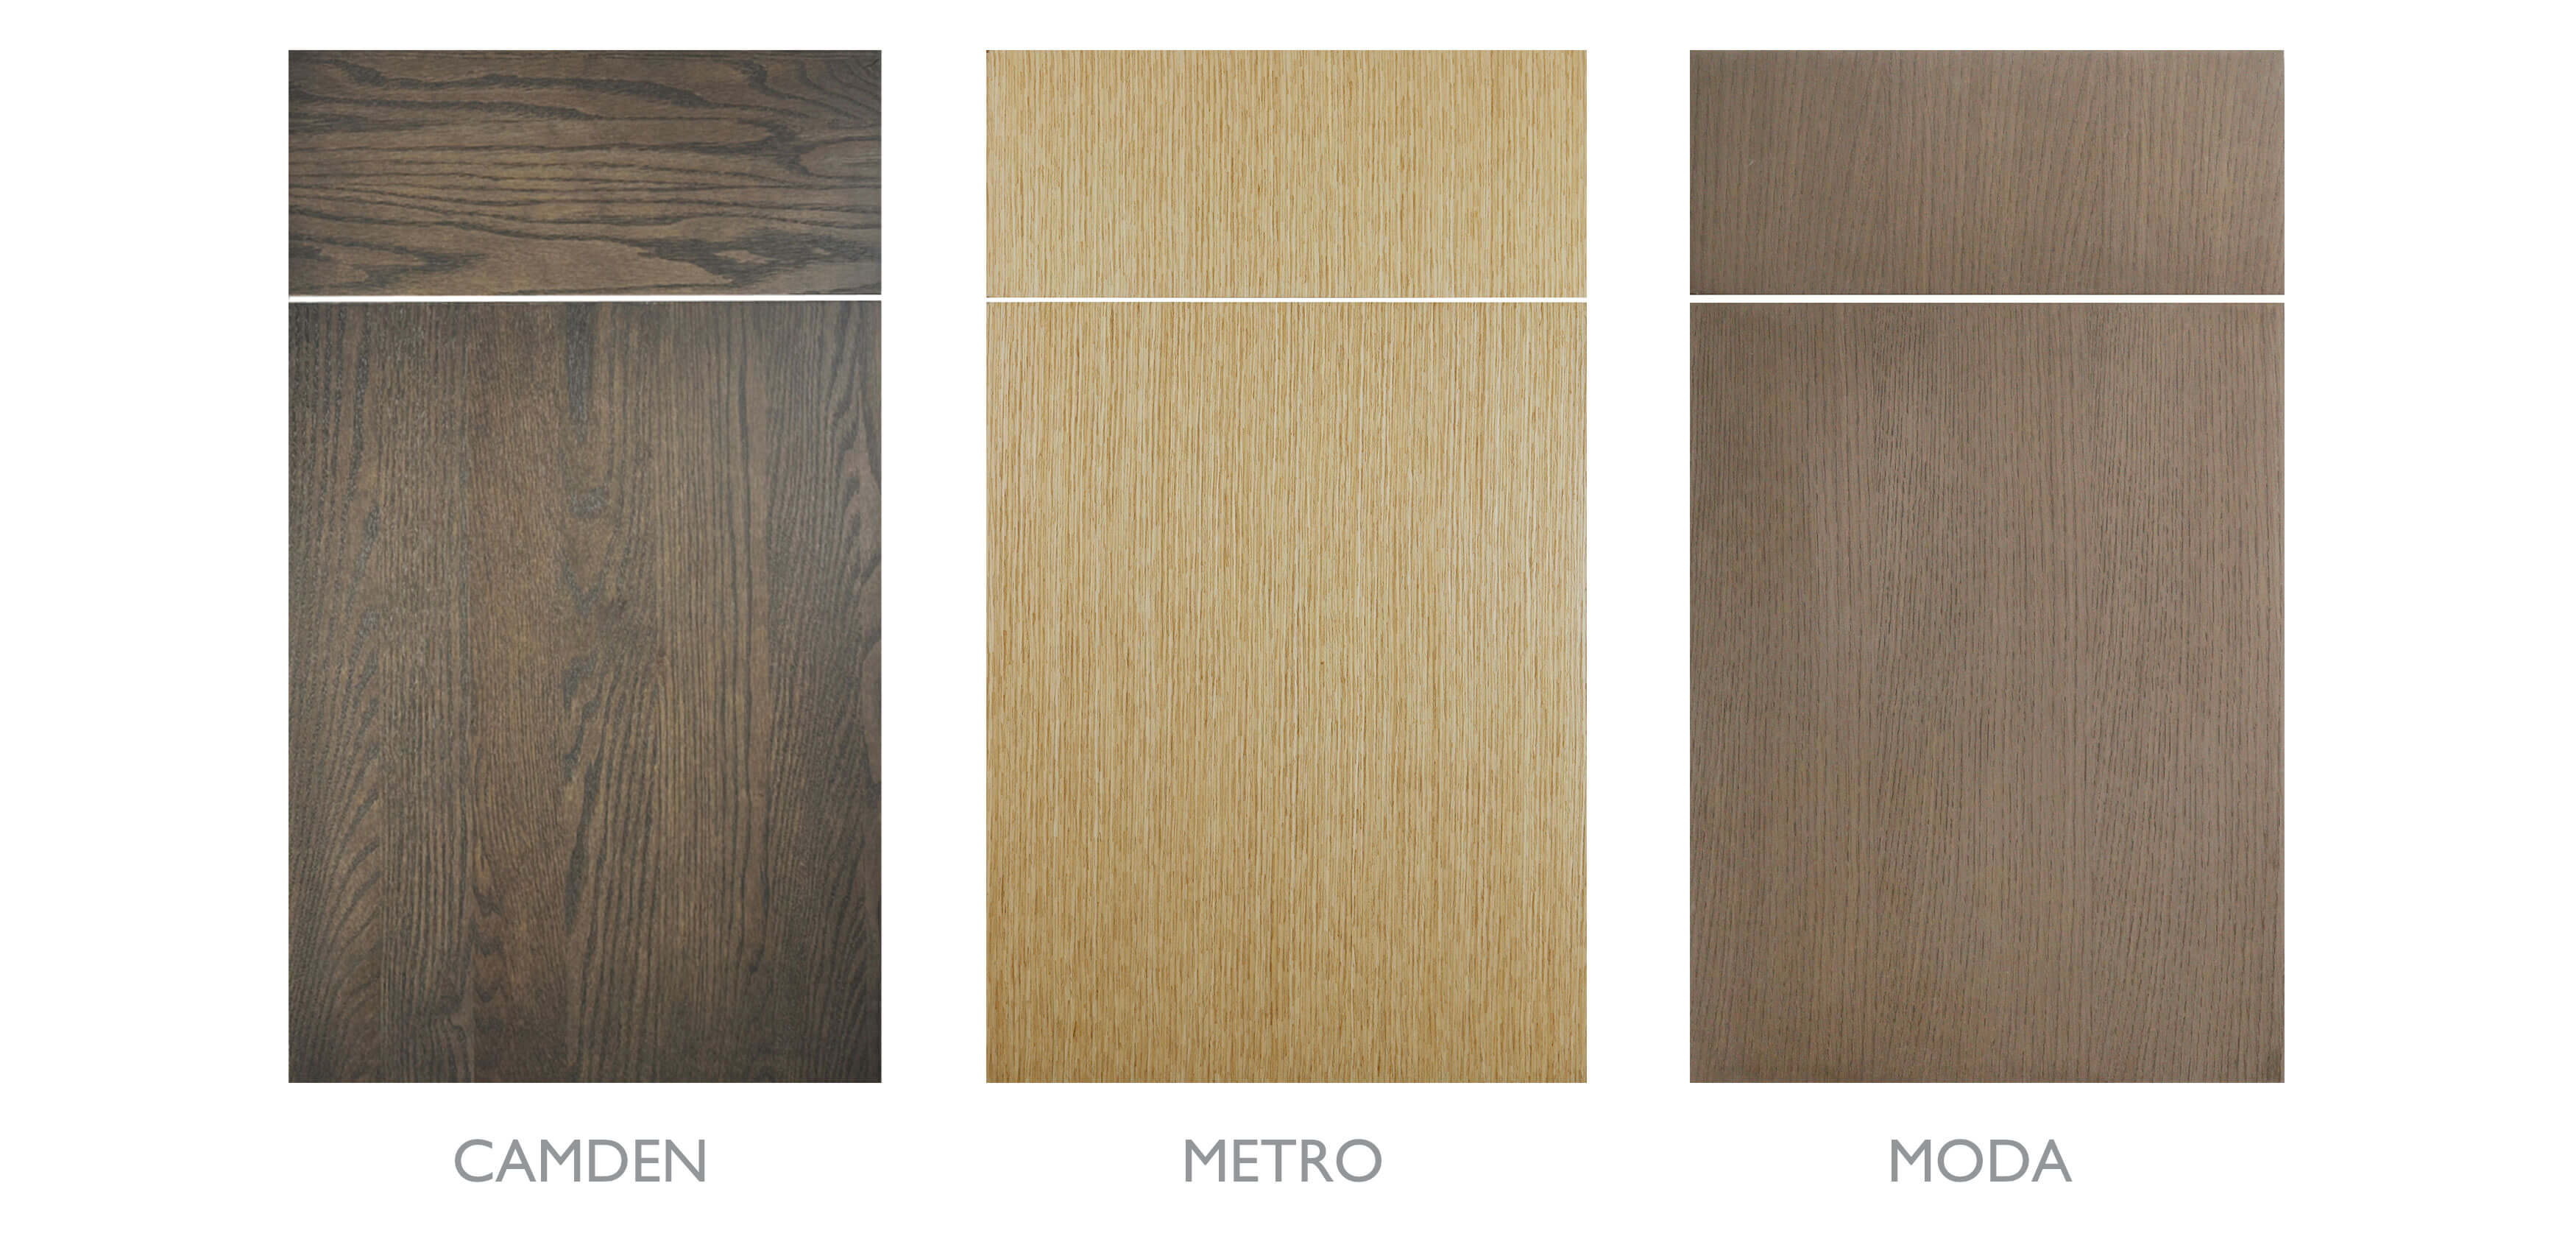 Three Wood Slab Cabinet Door Styles from Dura Supreme Cabinetry, Camden, Metro, and Moda.